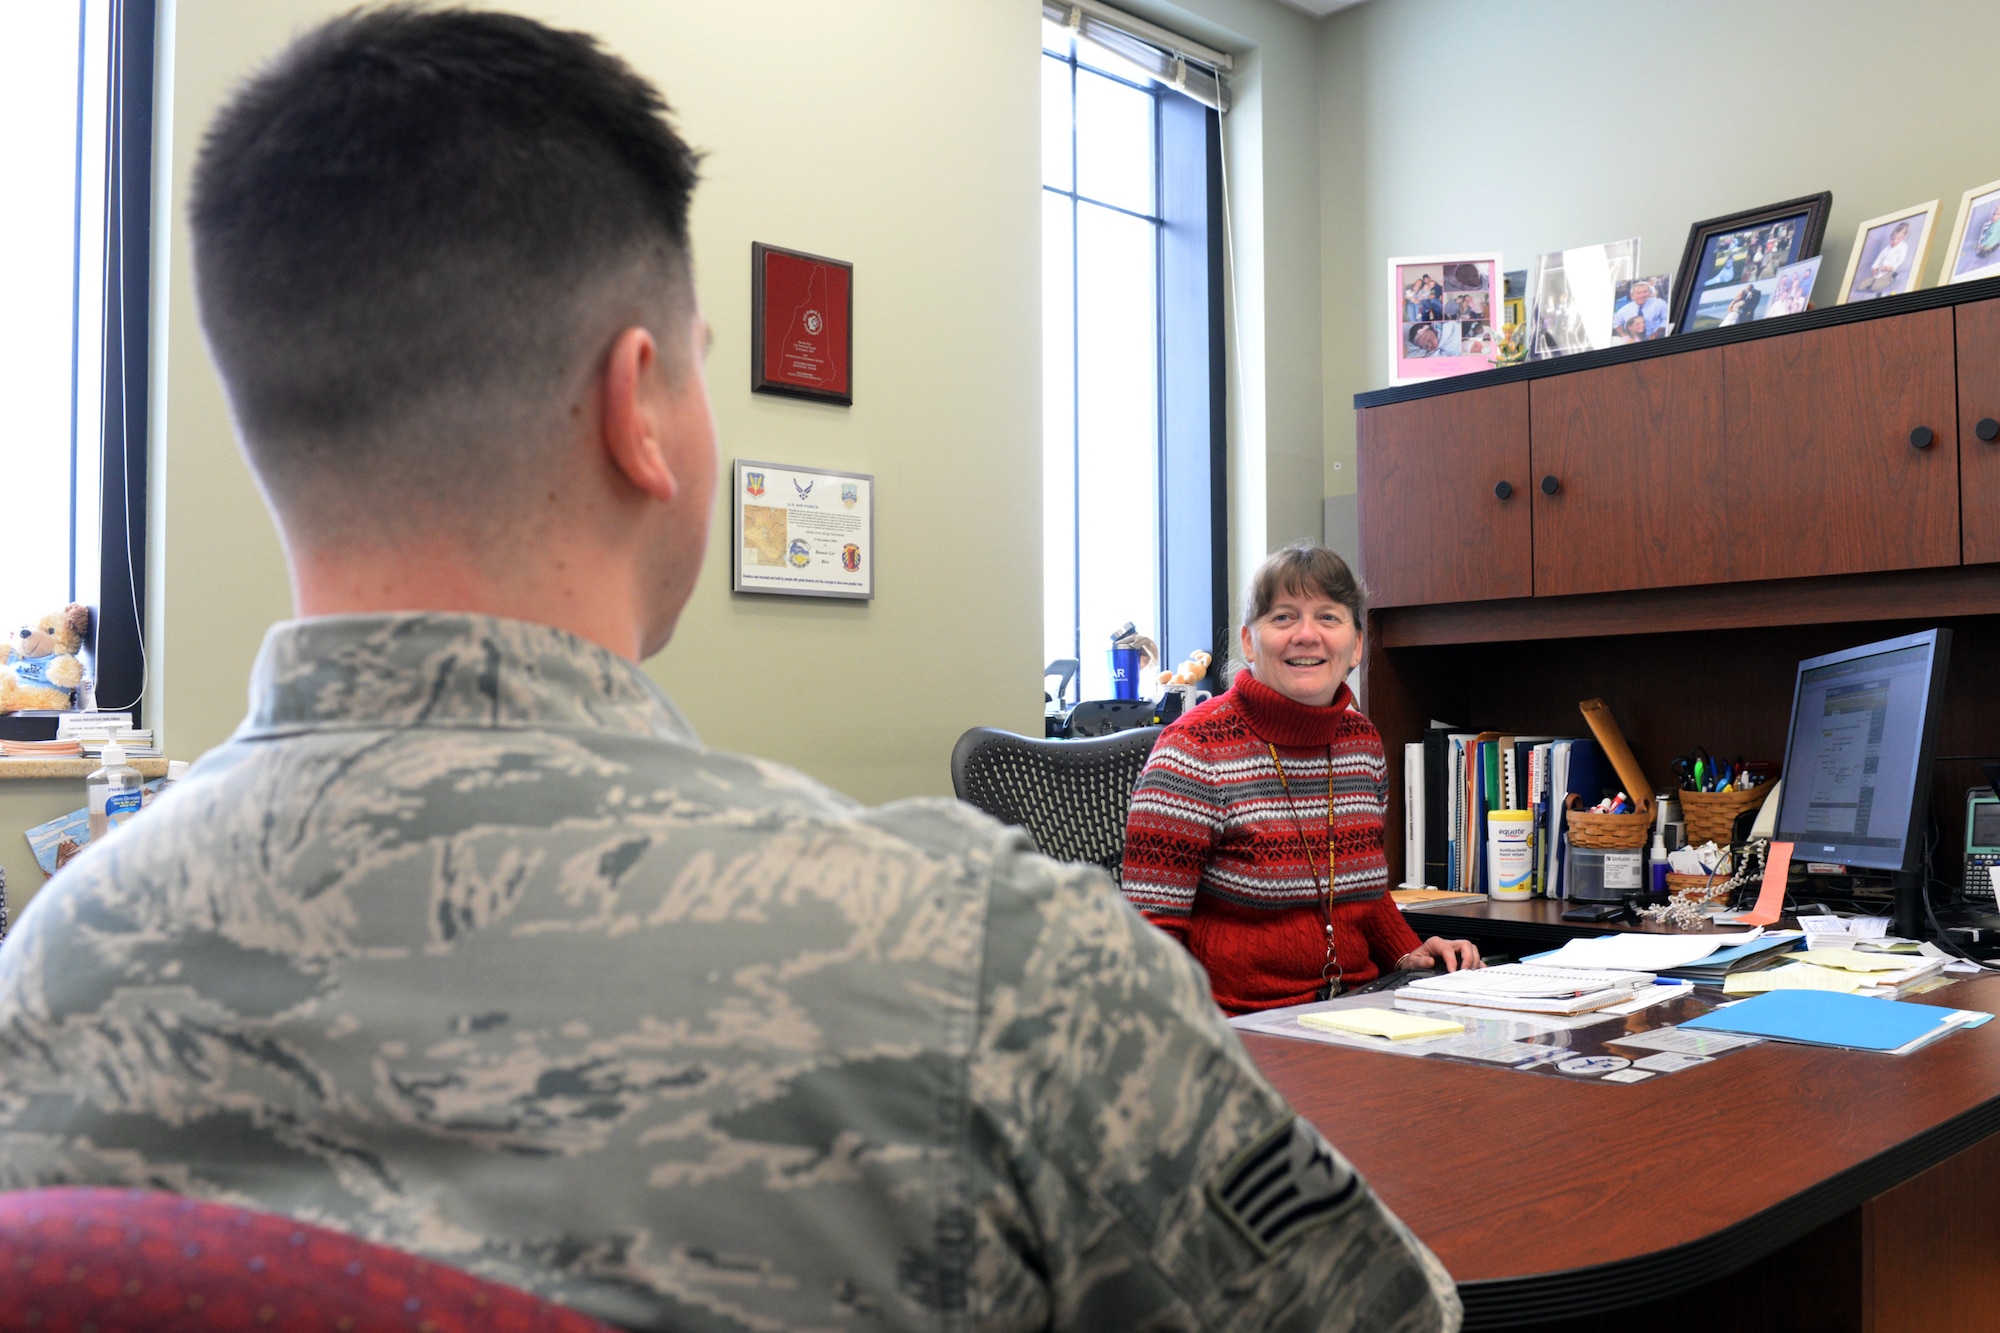 New Hampshire Air National Guard Airman and Family Readiness Program Manager, Mrs. Bonnie Rice, speaks to Staff Sgt. Curtis J. White on Feb. 8, 2015 at Pease Air National Guard Base, N.H. The 157th Air Refueling Wing is one of seven reserve component units to be recognized during the 2014 Department of Defense Reserve Family Readiness Awards Ceremony to be held Feb. 27, at the Pentagon. (U.S. Air National Guard photo by Staff Sgt. Curtis J. Lenz)